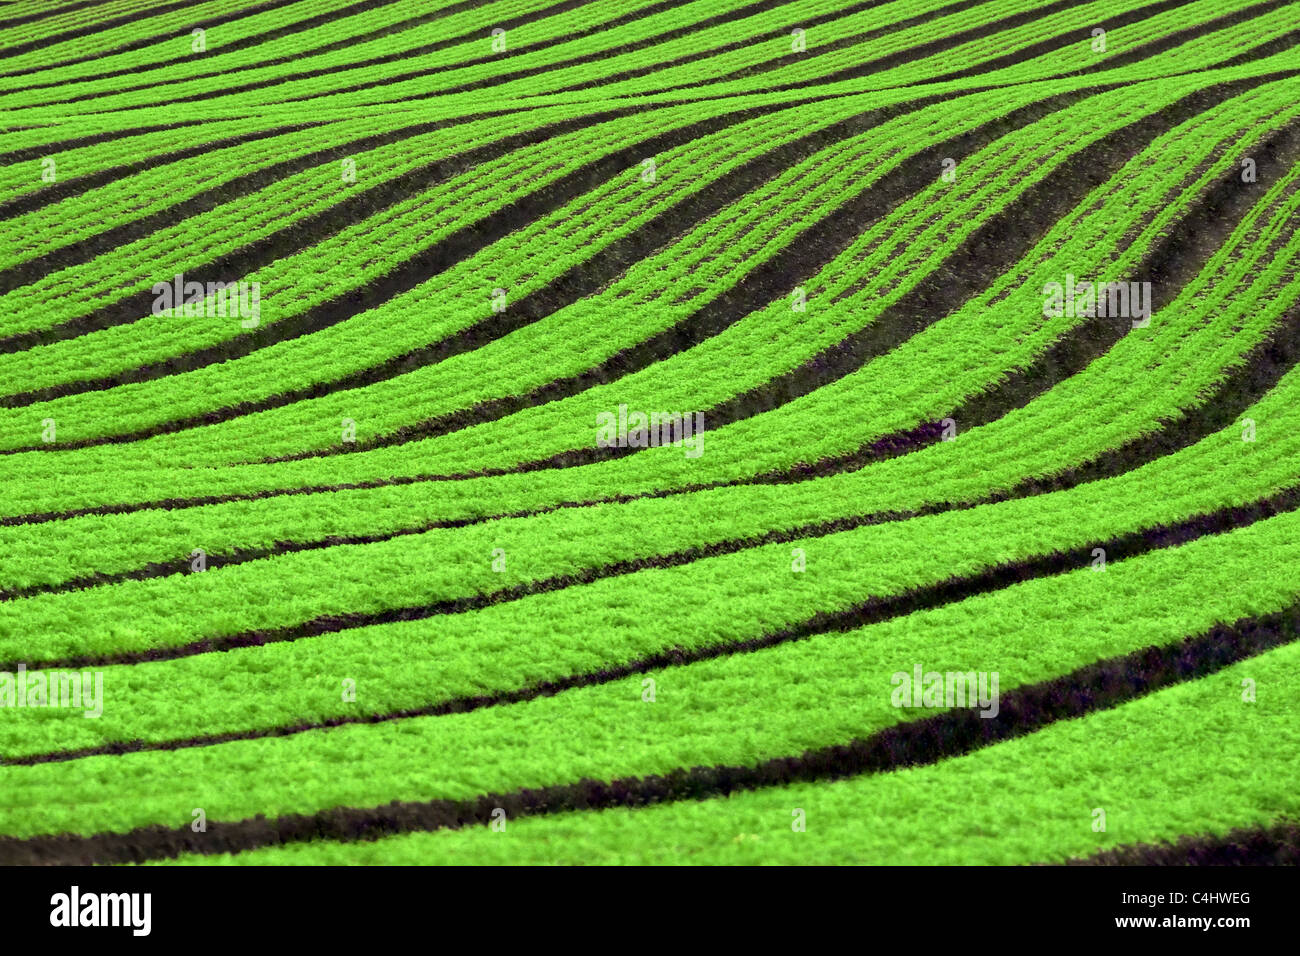 Rows of Carrot Crops Stock Photo